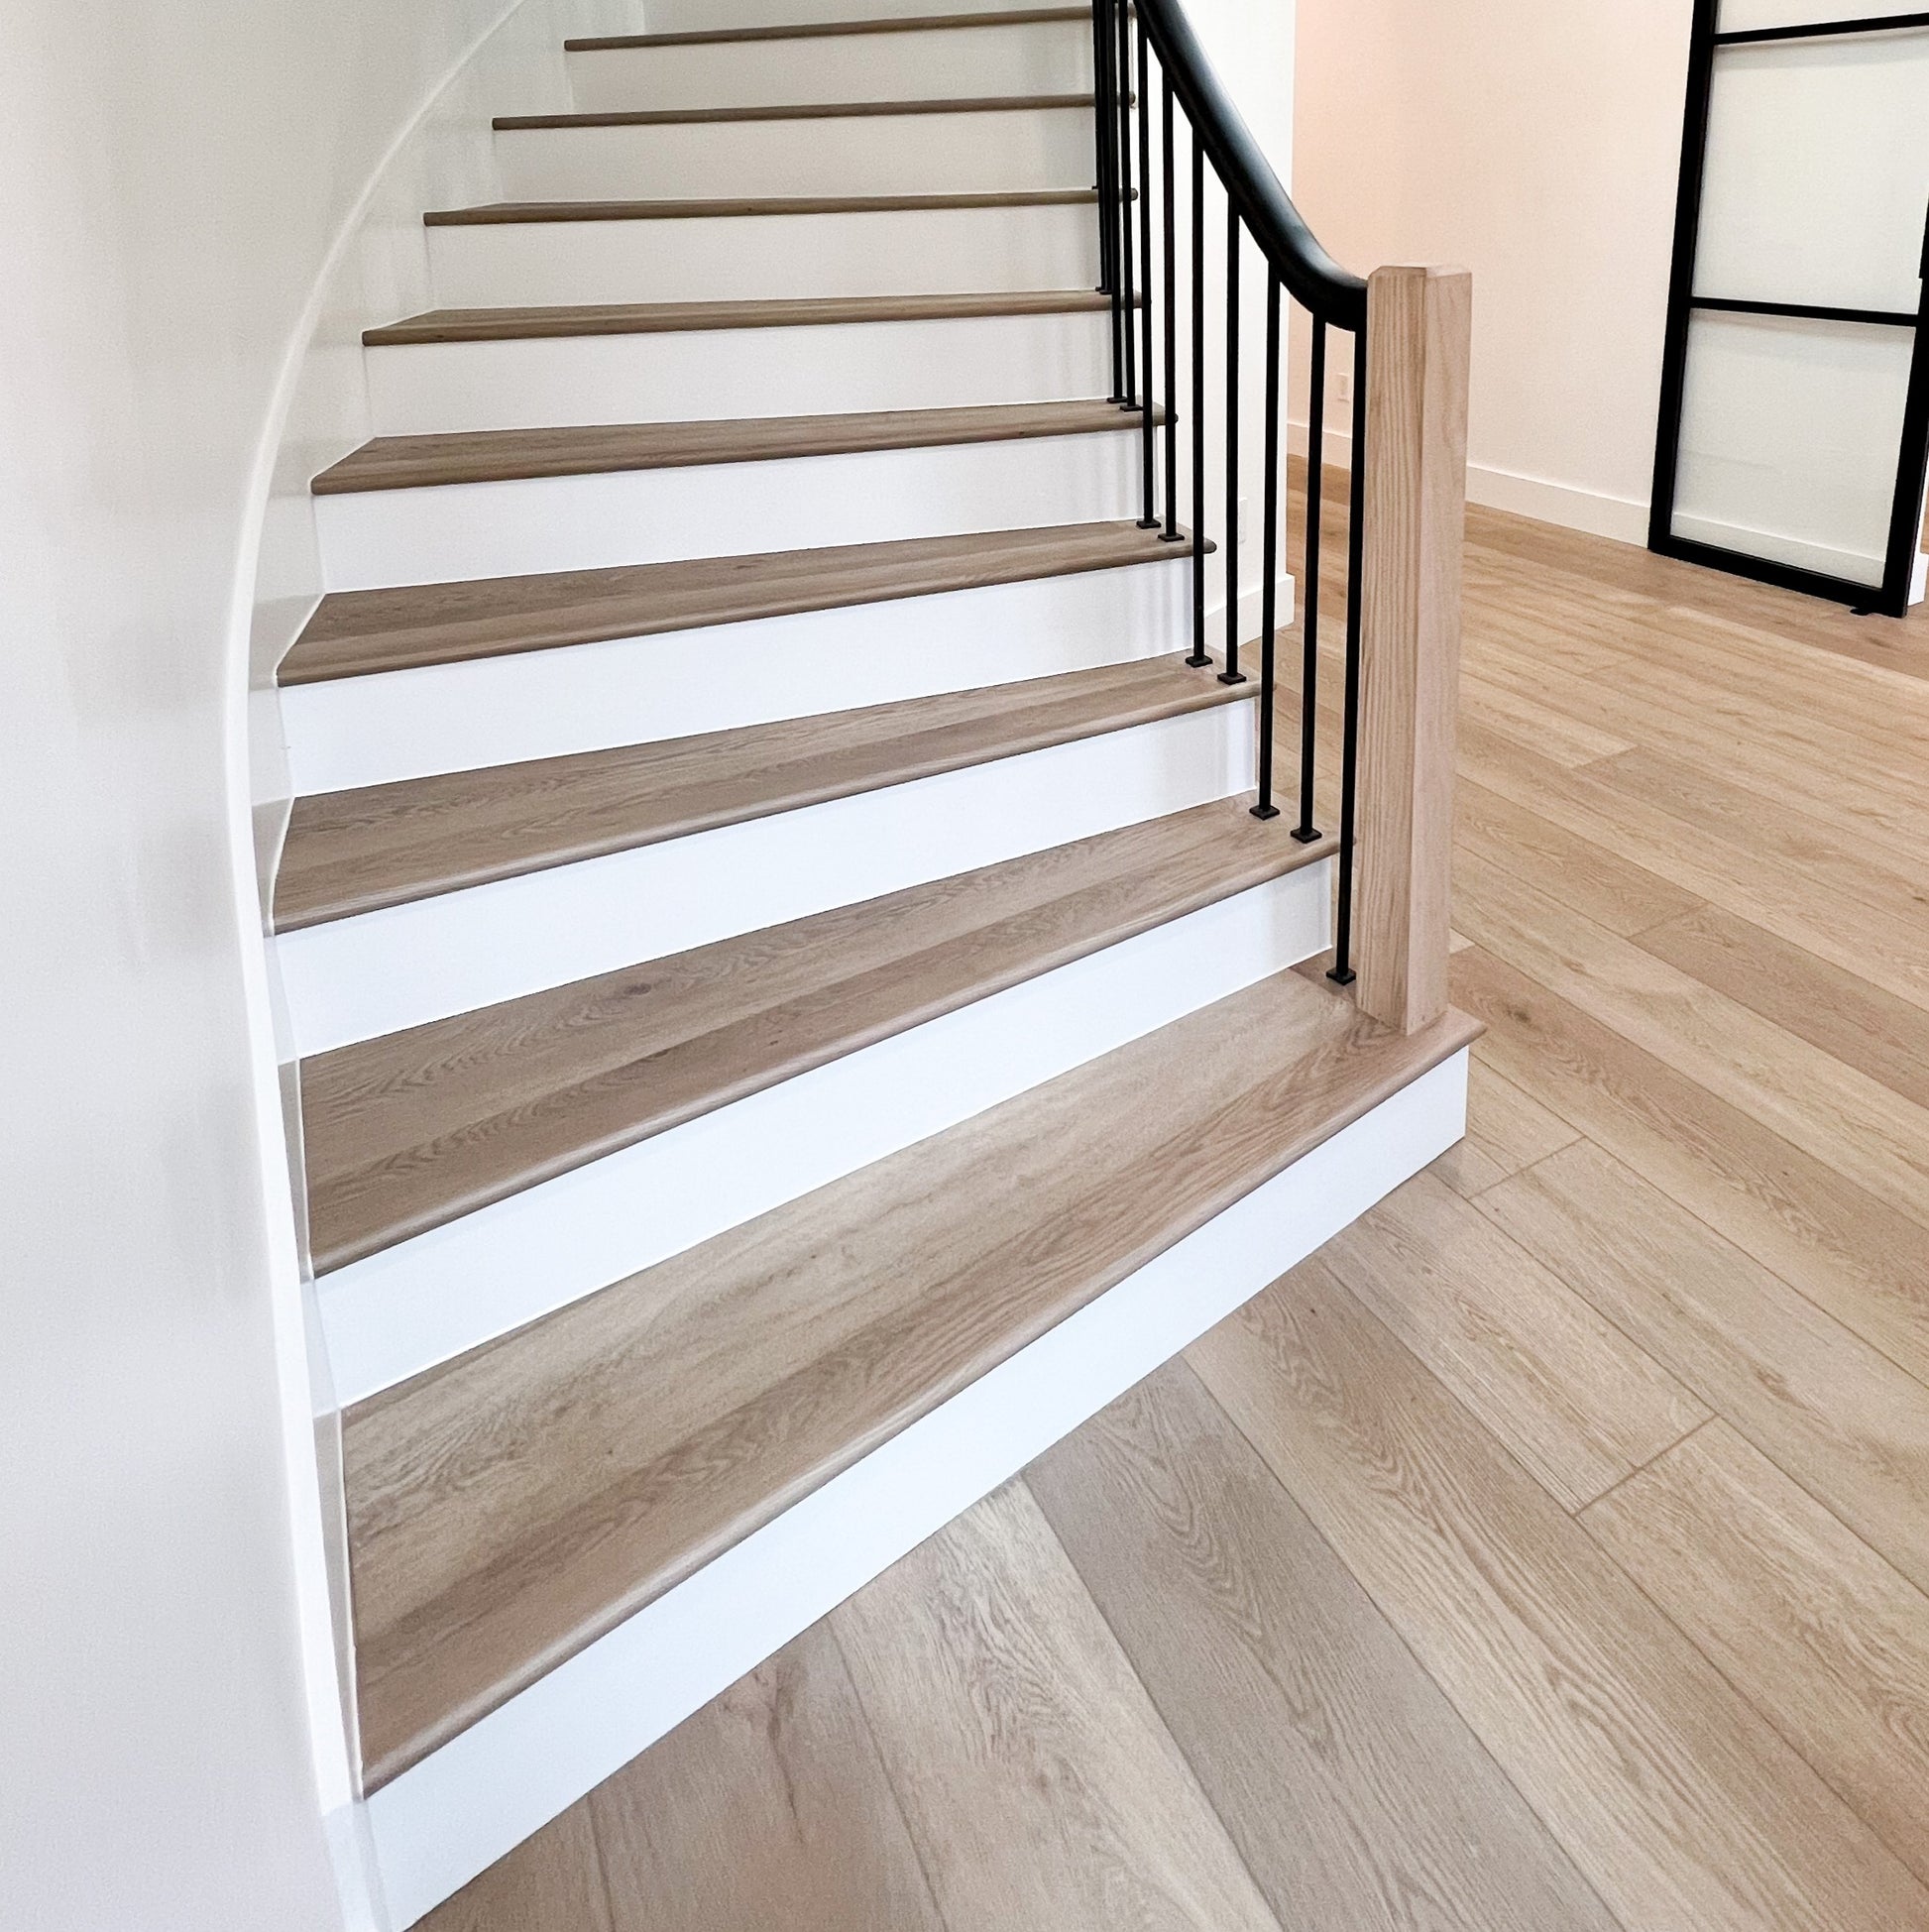 Photo of a curved staircase with Hewn's rounded stair nose in Rustic Stoneform Flooring